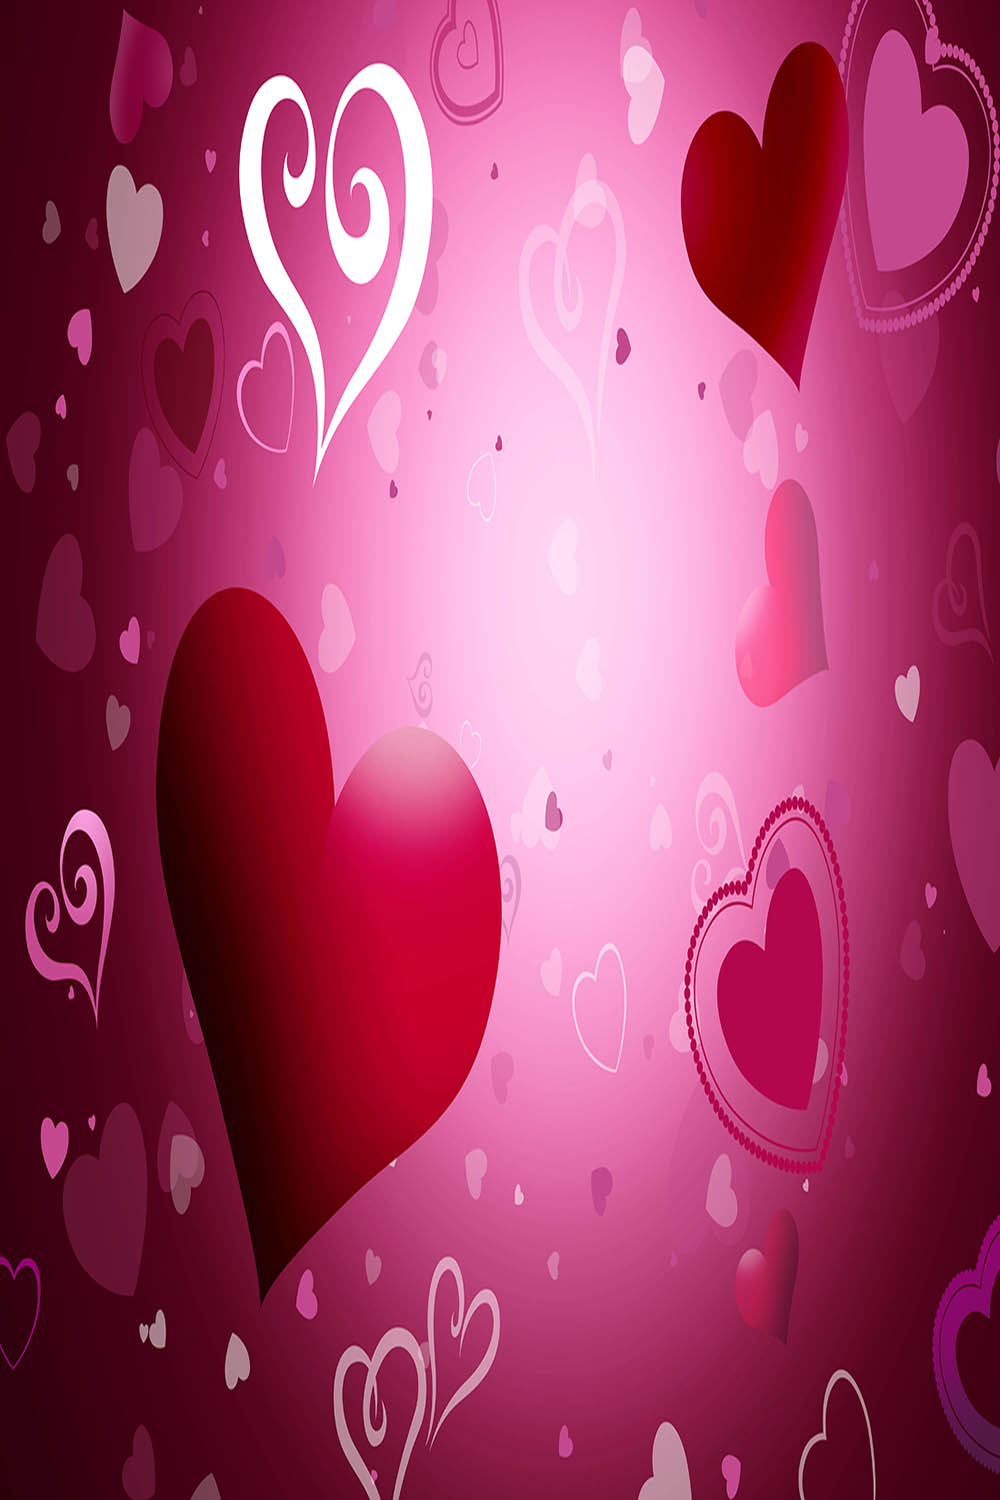 love heart background pinterest preview image.